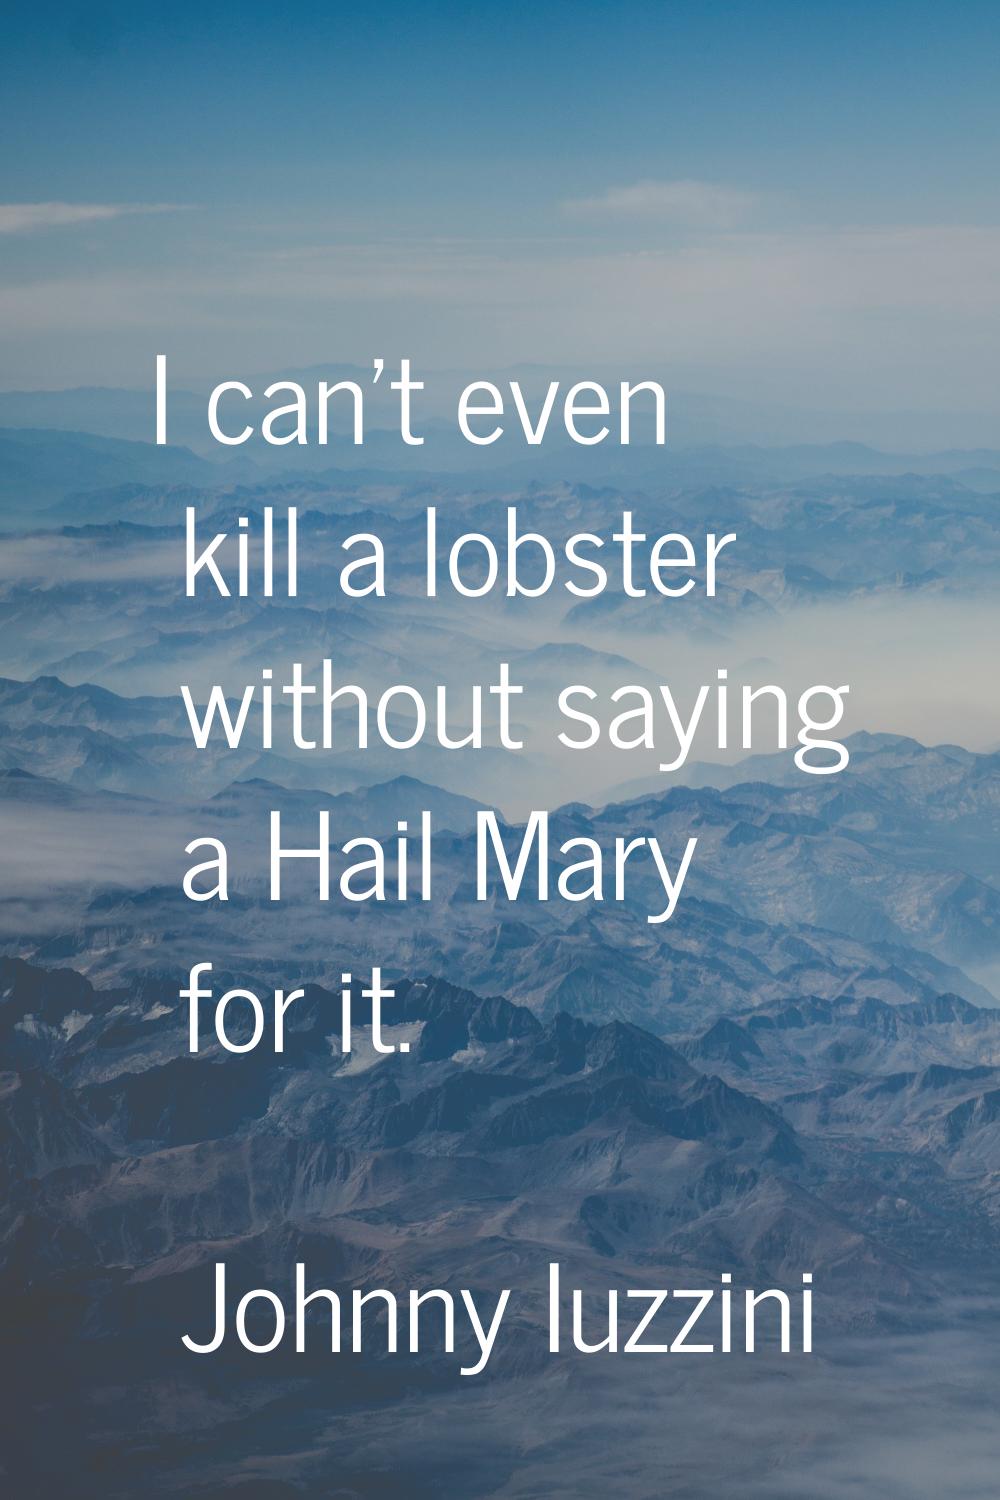 I can't even kill a lobster without saying a Hail Mary for it.